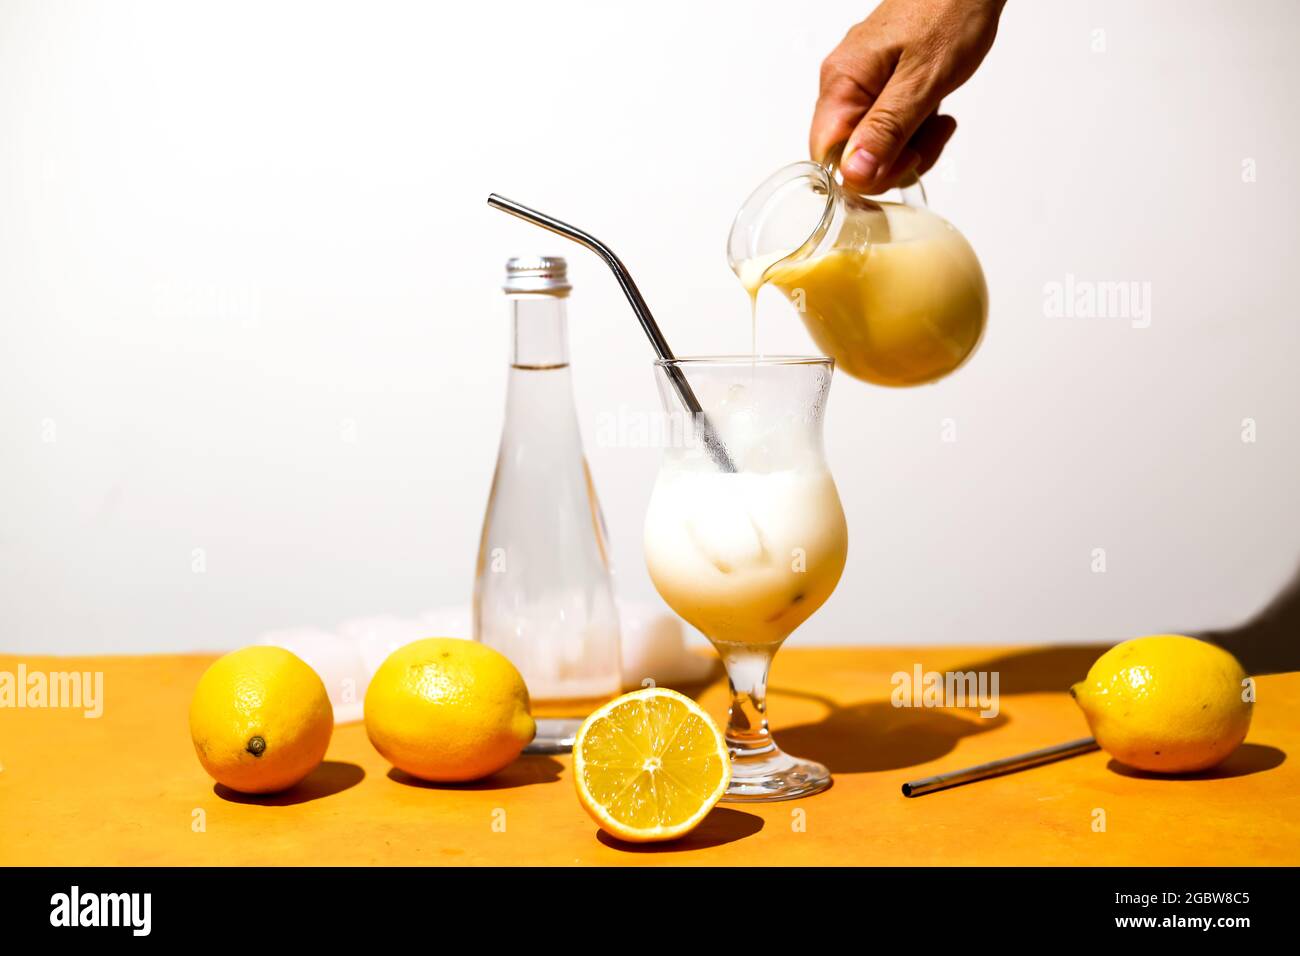 Creamy lemonade trendy summer mocktail. Cold non-alcoholic cocktail with lemon juice and sweetened condensed milk. Ingredients for prepare delicious b Stock Photo